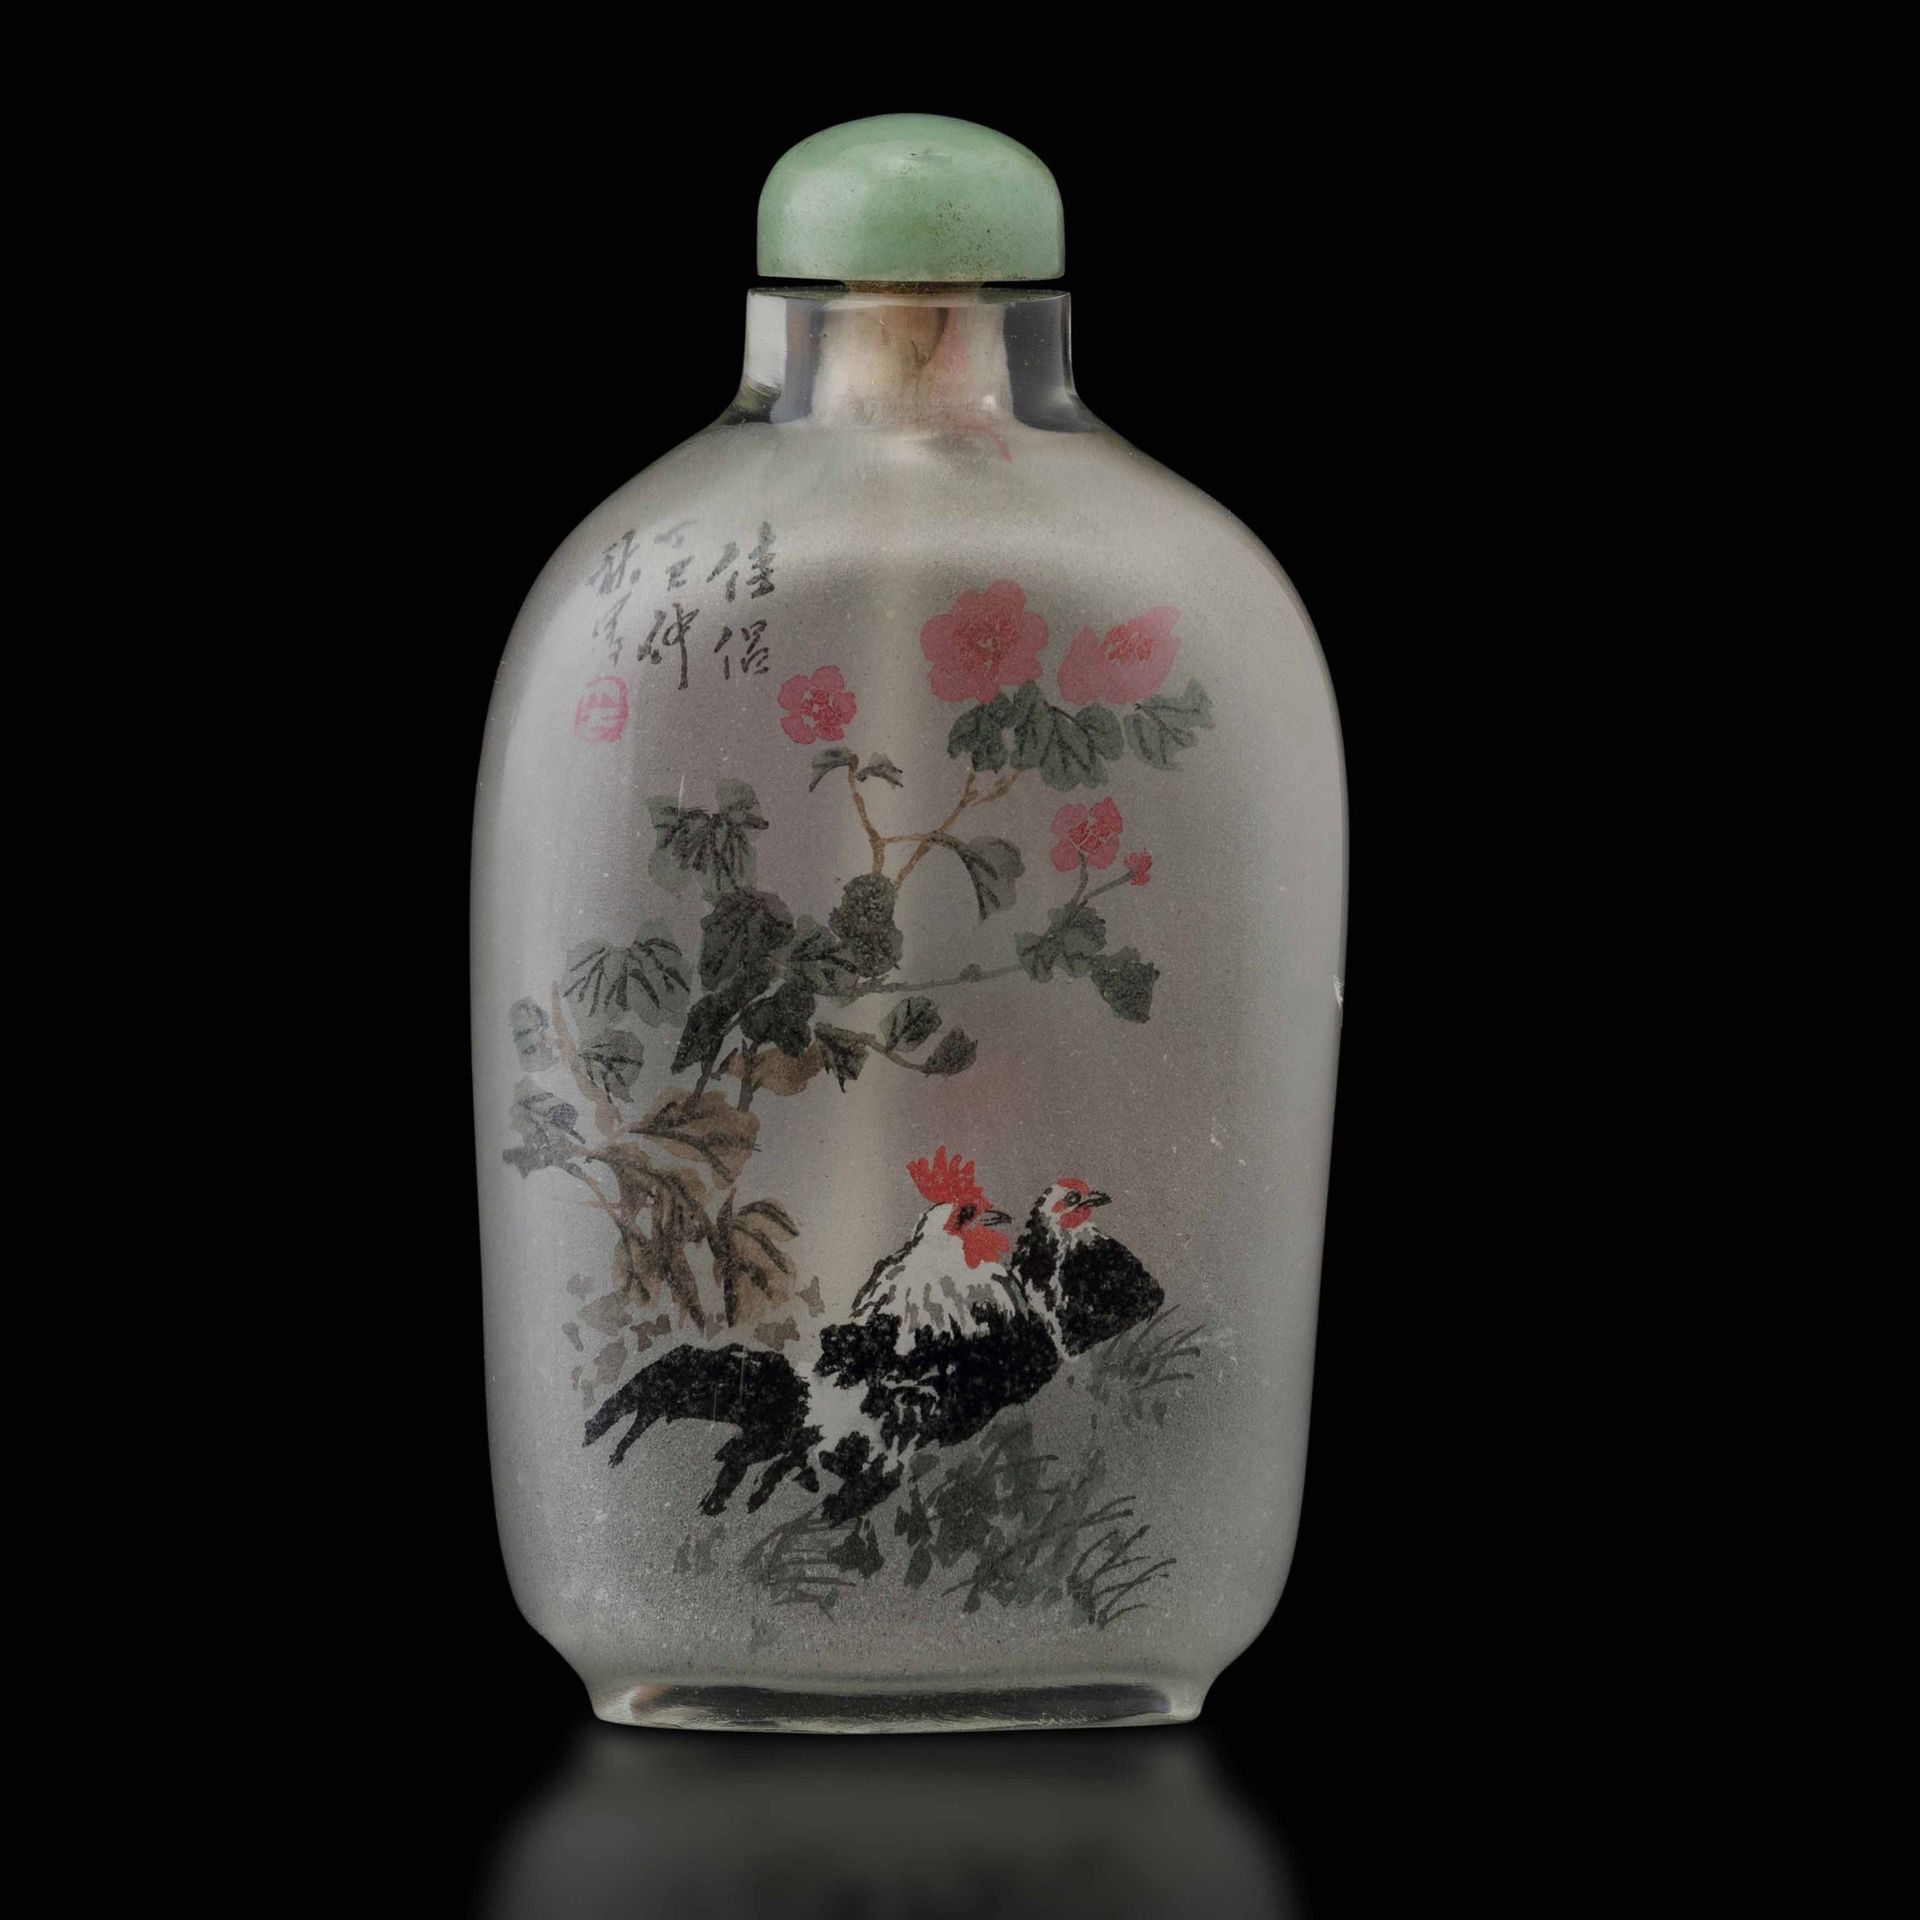 A glass snuff bottle, China, early 1900s H 8.5cm